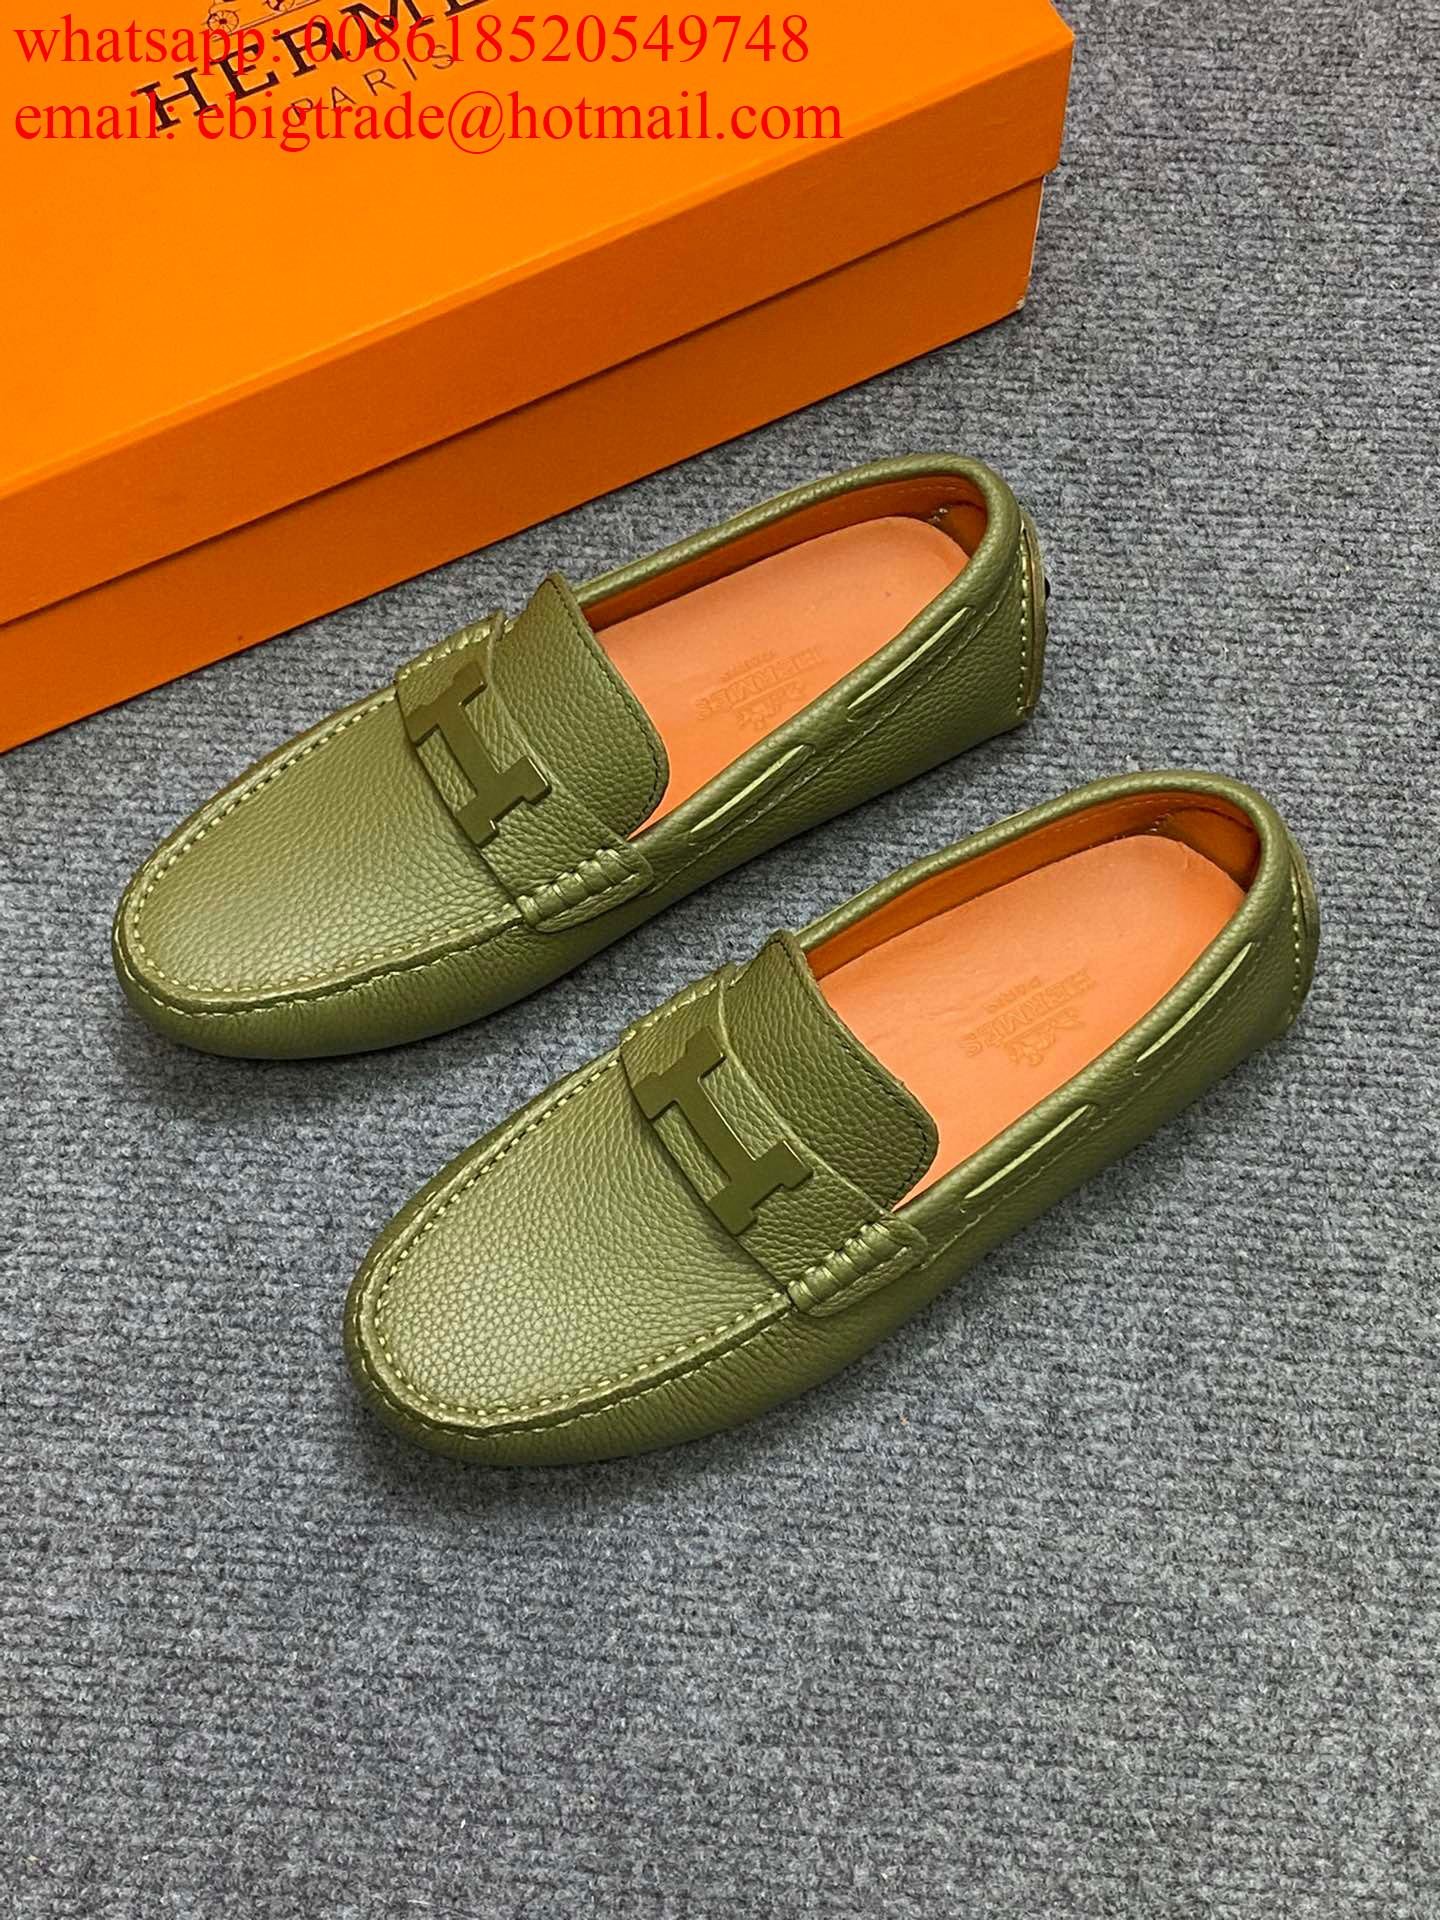 hermes shoes on sale 